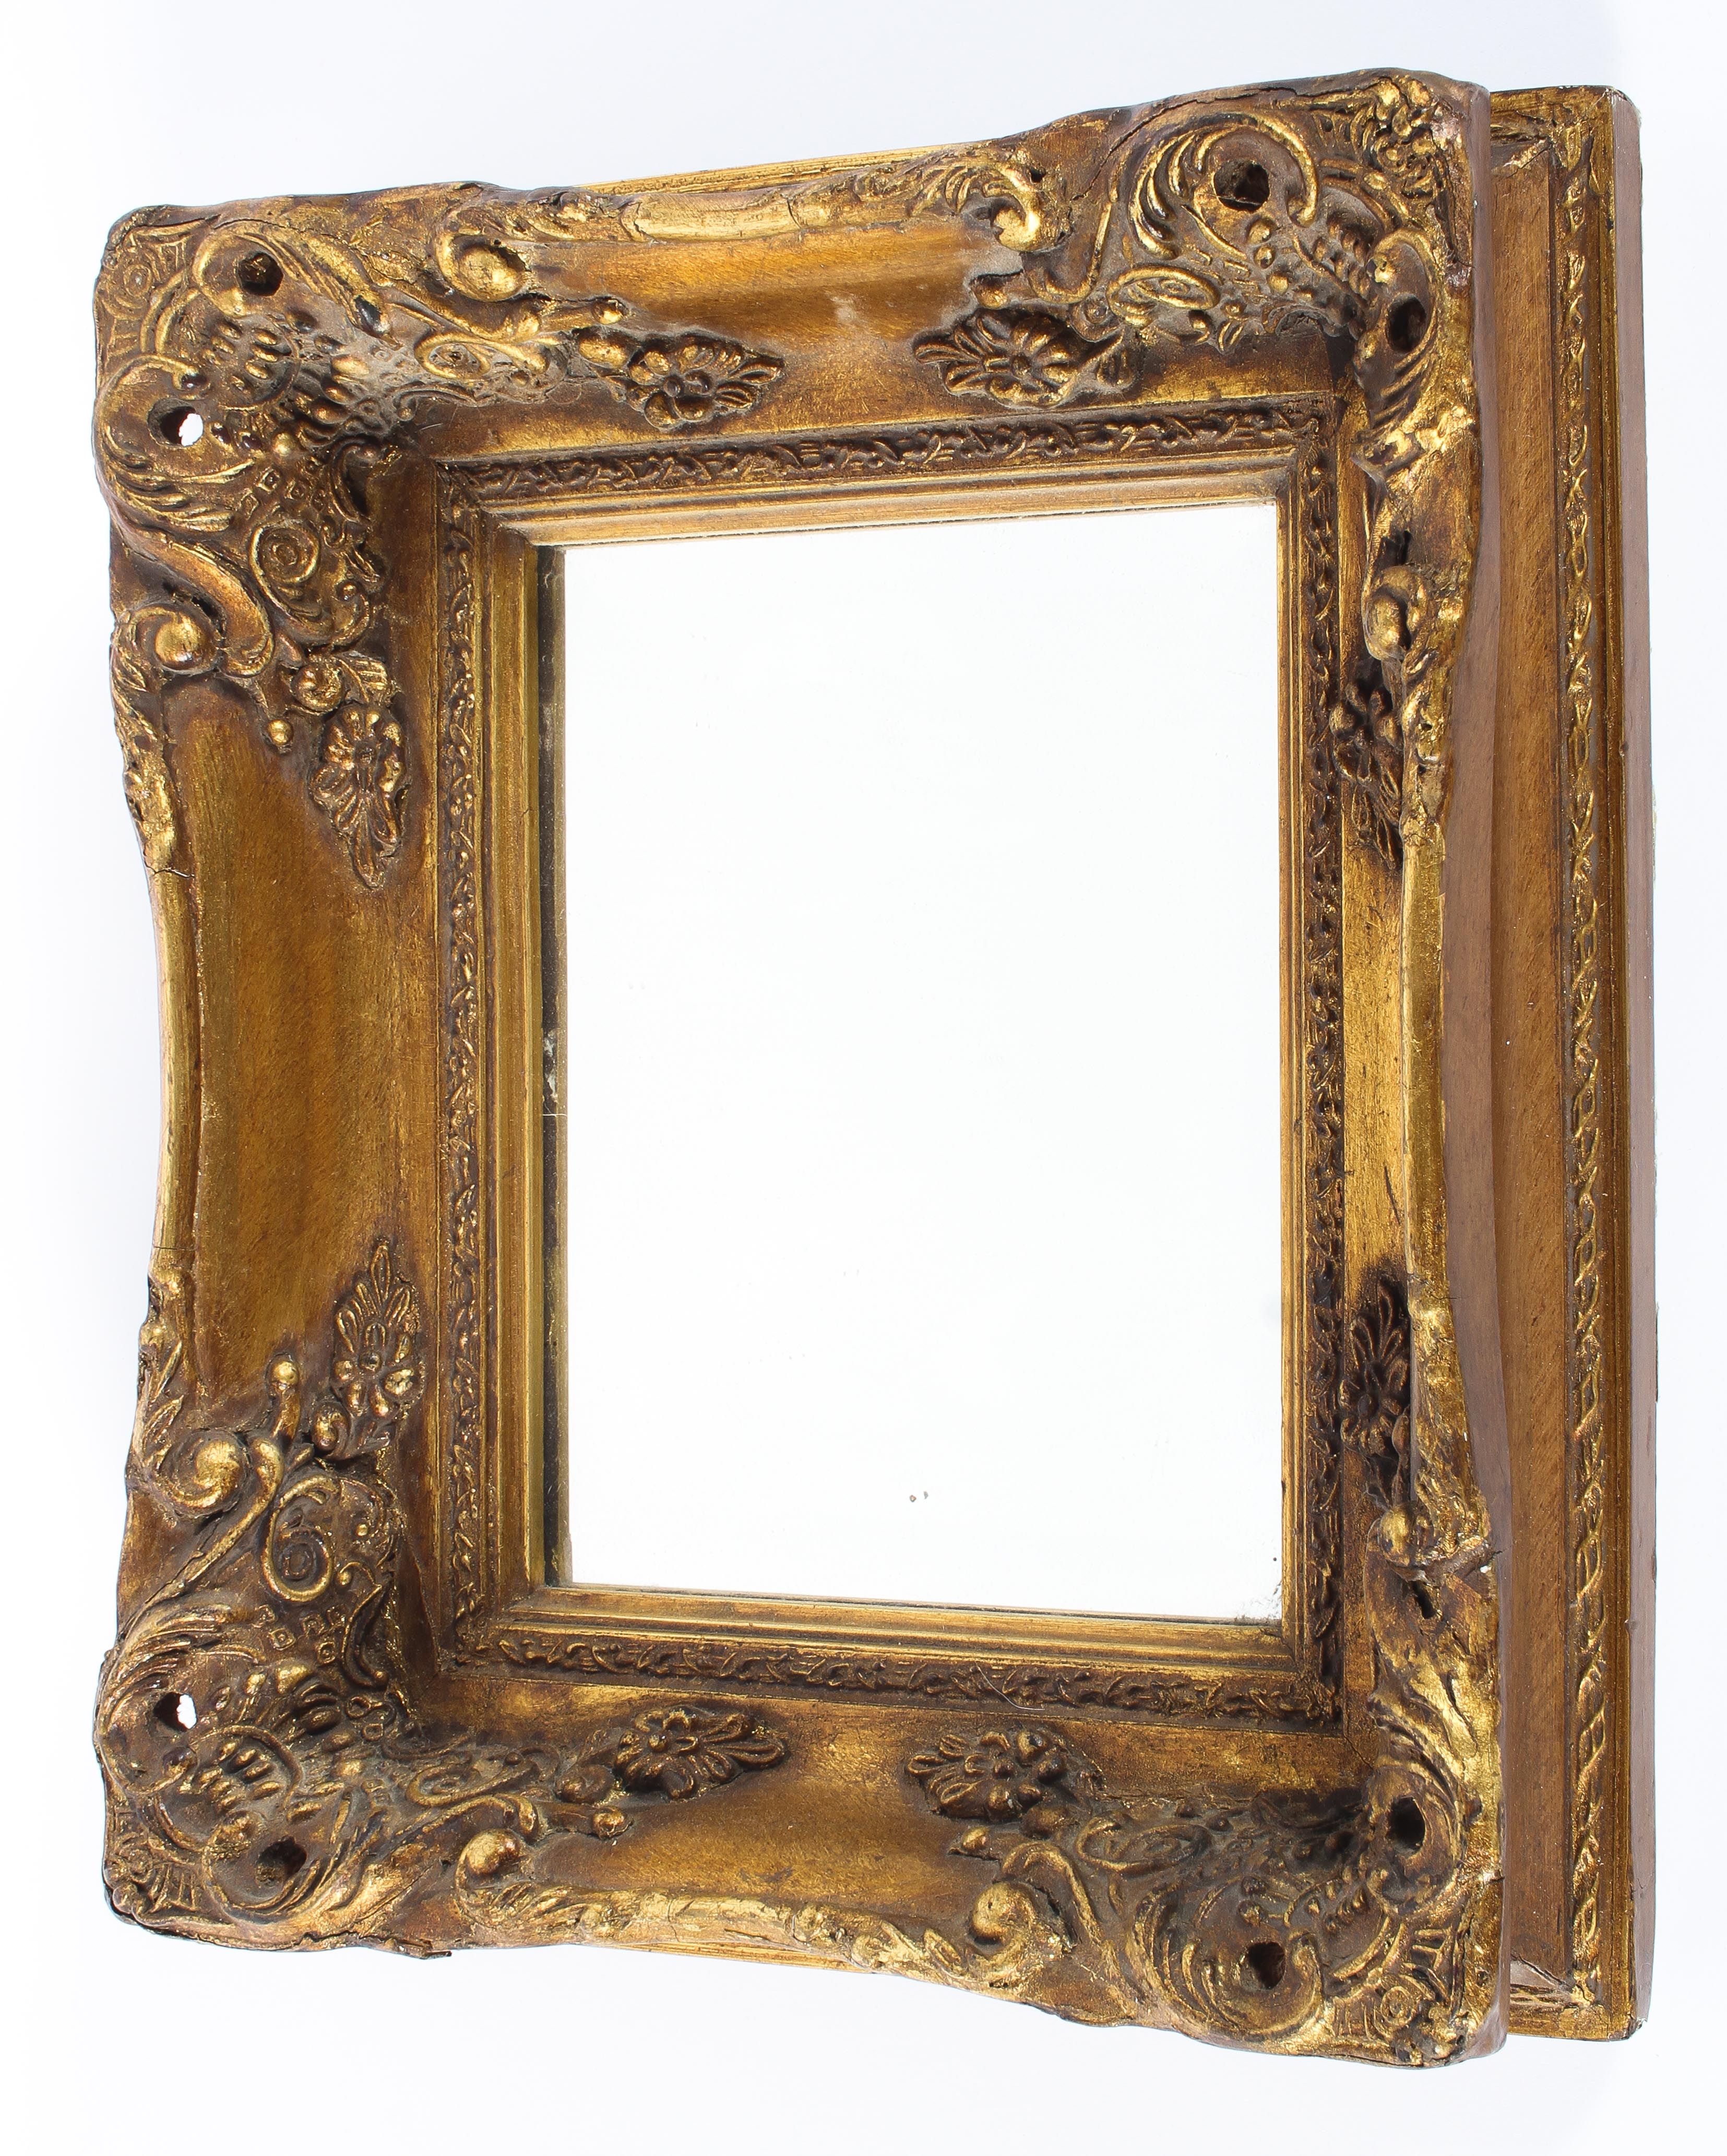 A giltwood and gesso bevelled rectangular mirror, late 19th/early 20th century,